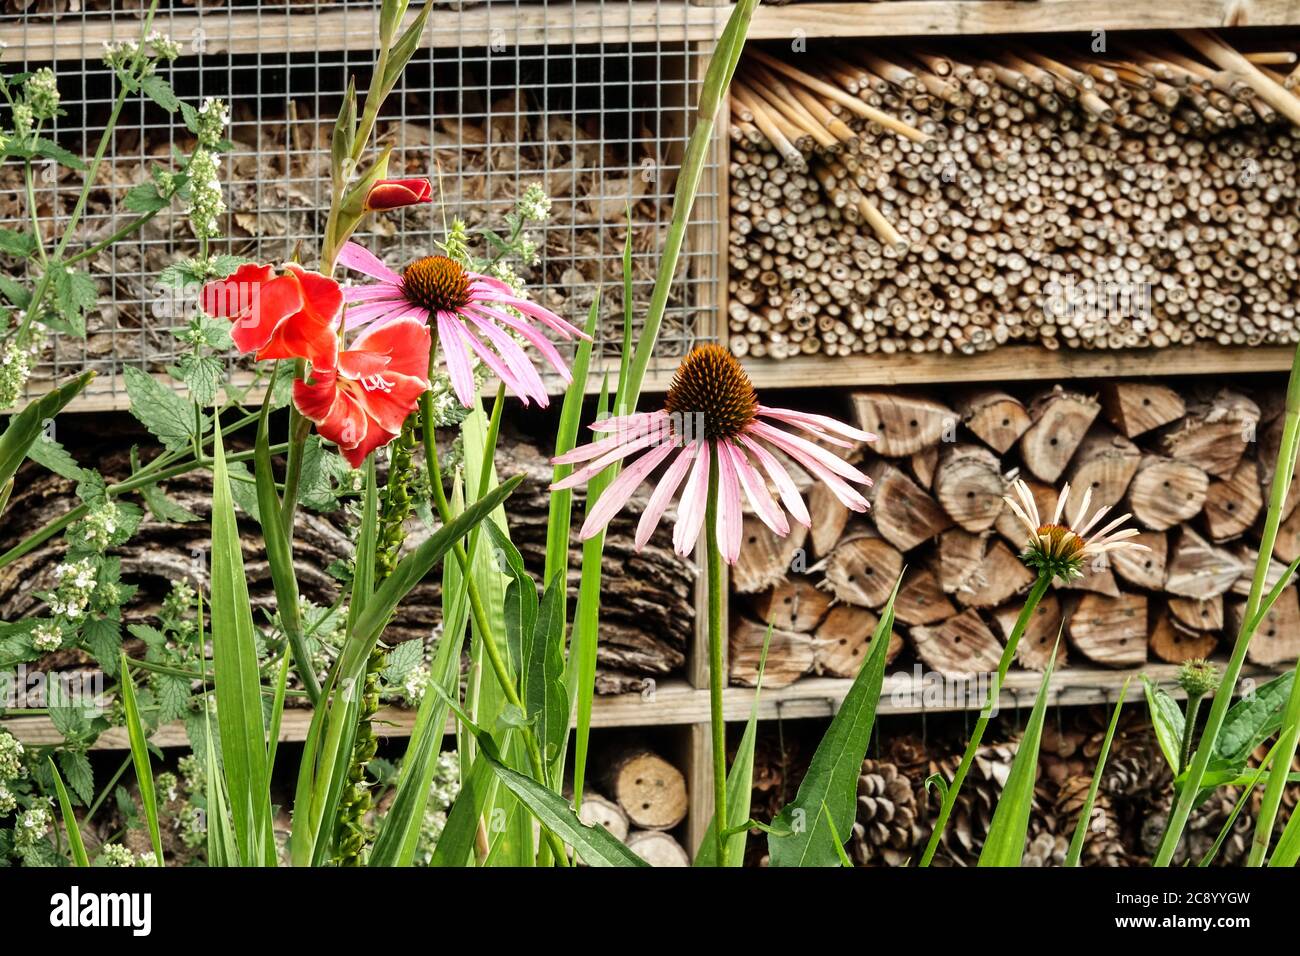 Bug shelter, bug hotel encouraging wildlife, wooden box in garden, refuge place for beneficial insects Stock Photo